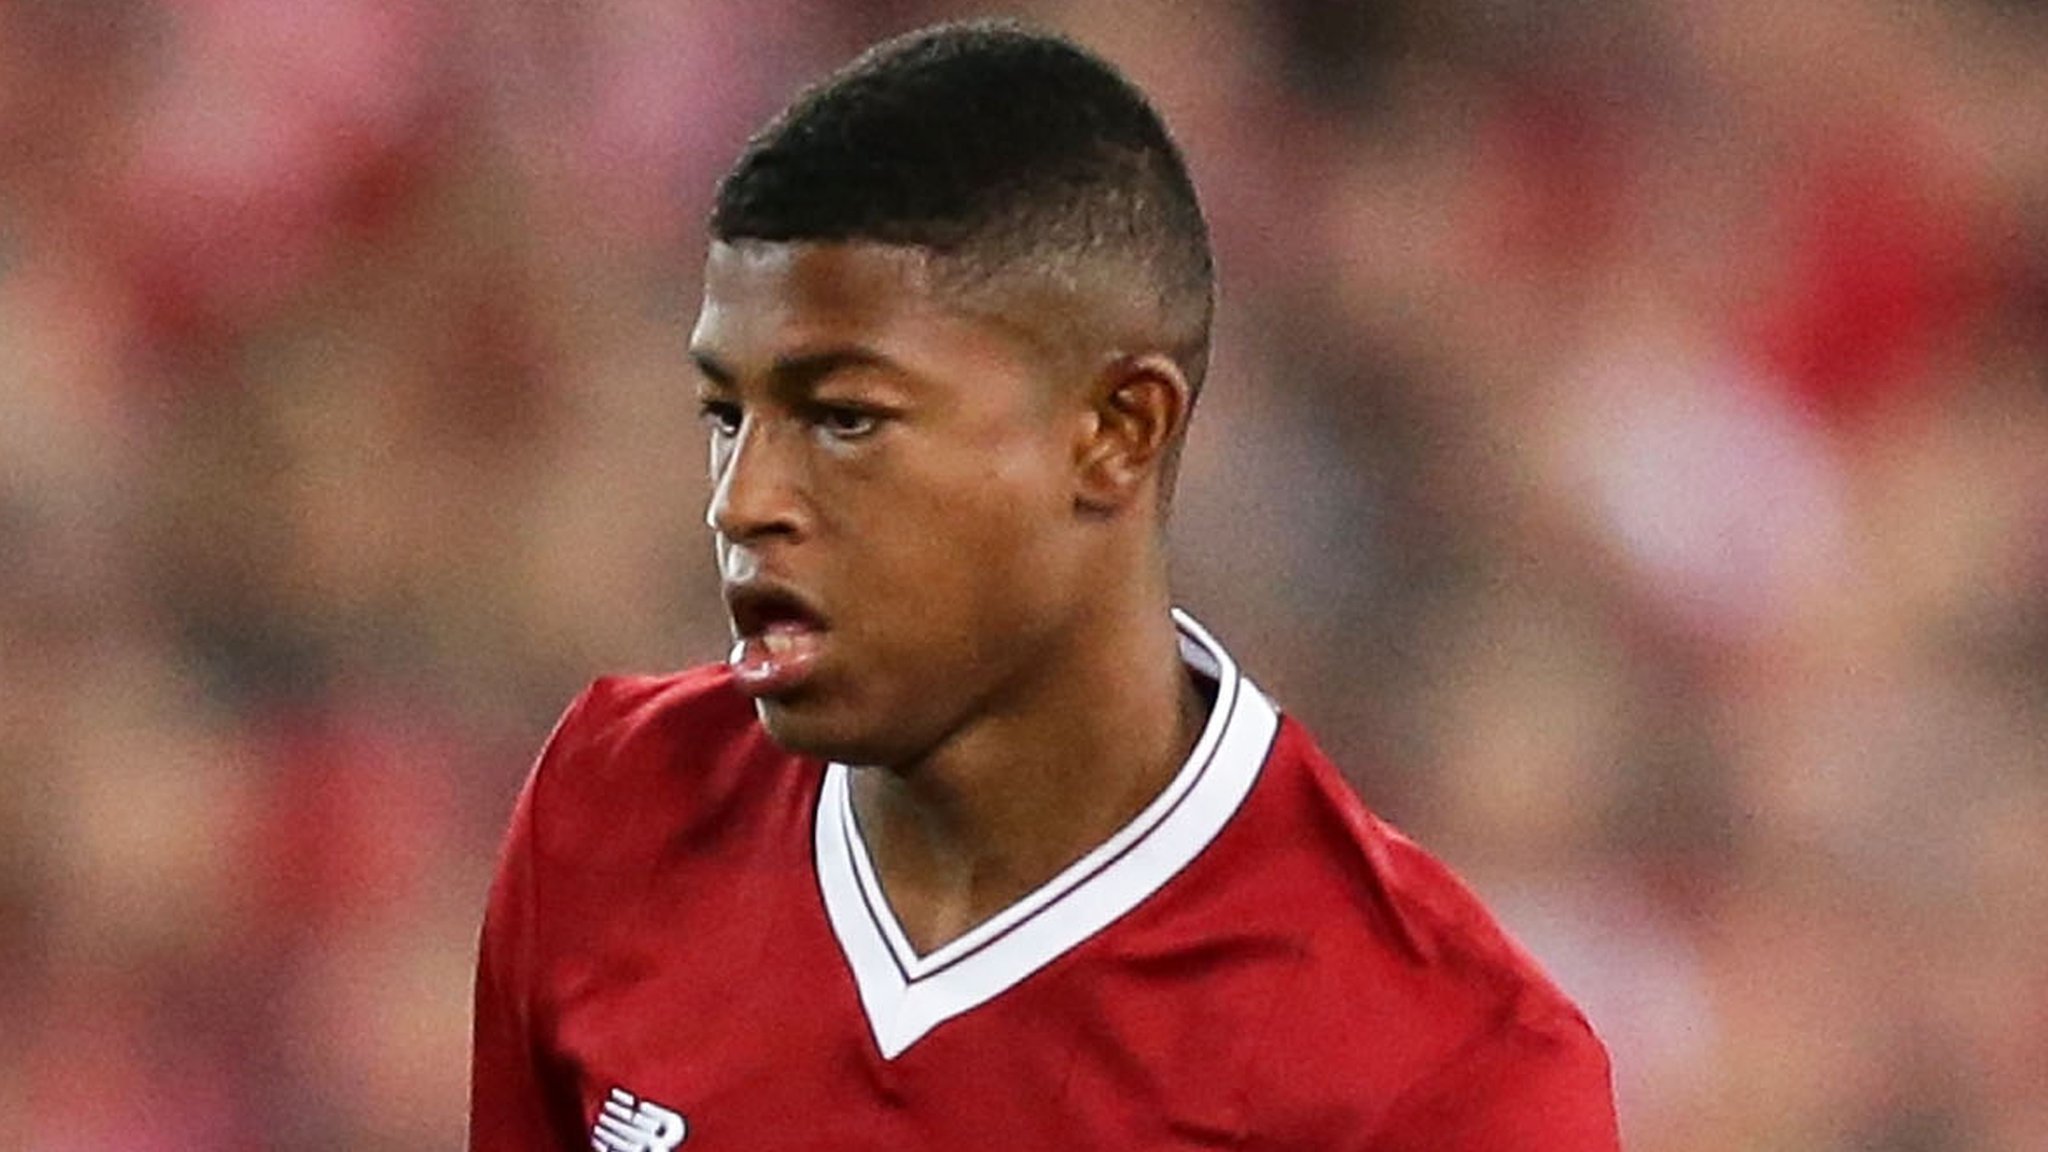 Uefa to take no action over Brewster's racism claim